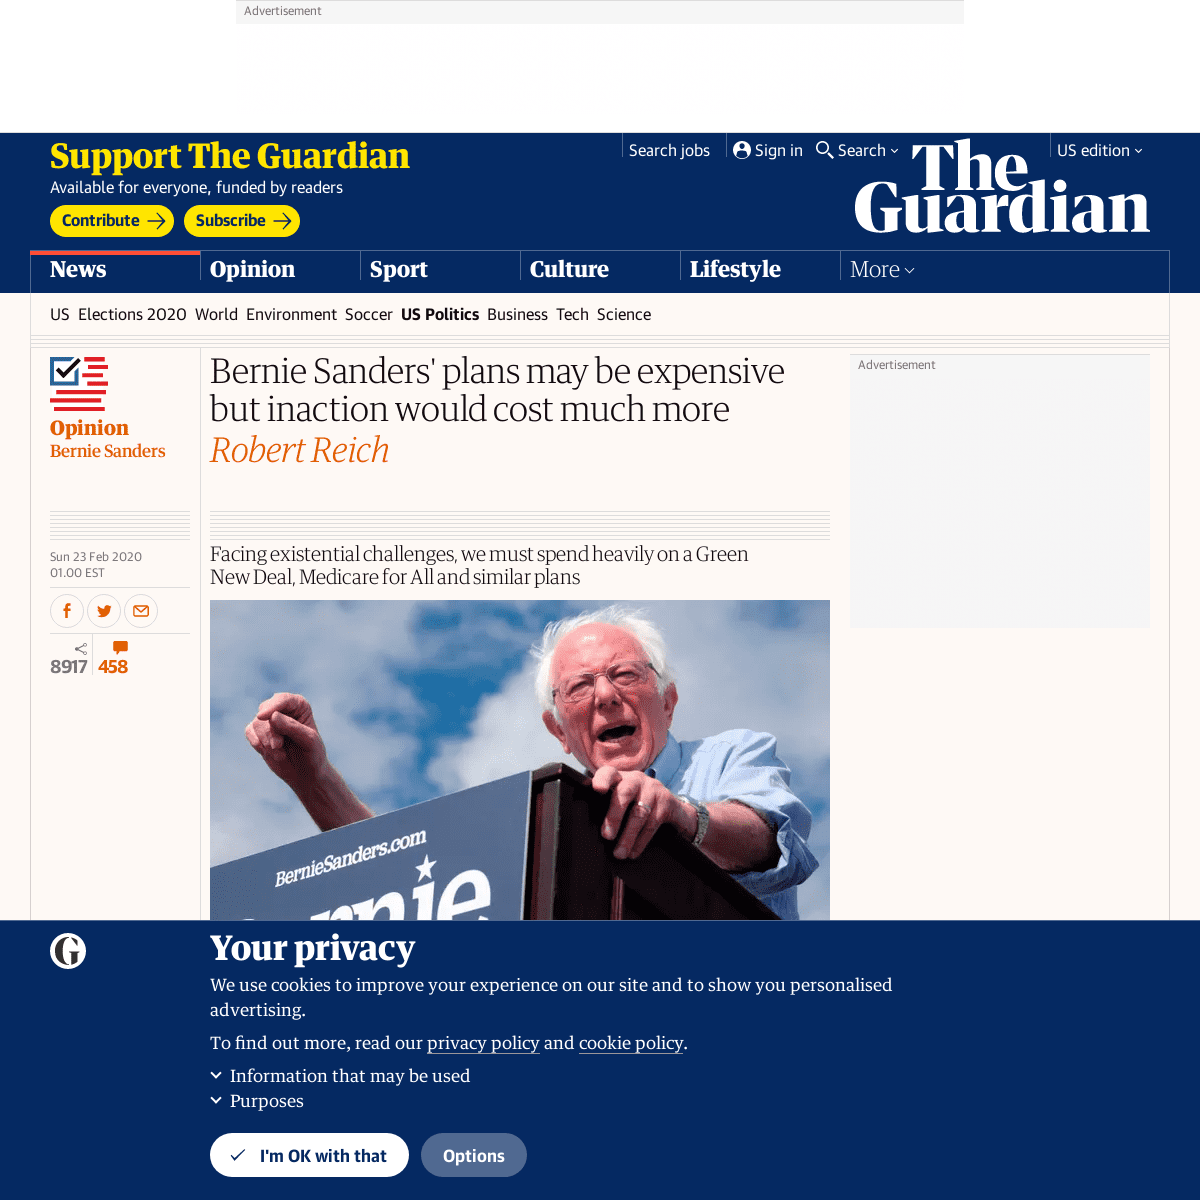 A complete backup of www.theguardian.com/commentisfree/2020/feb/22/bernie-sanders-green-new-deal-medicare-for-all-expensive-inac